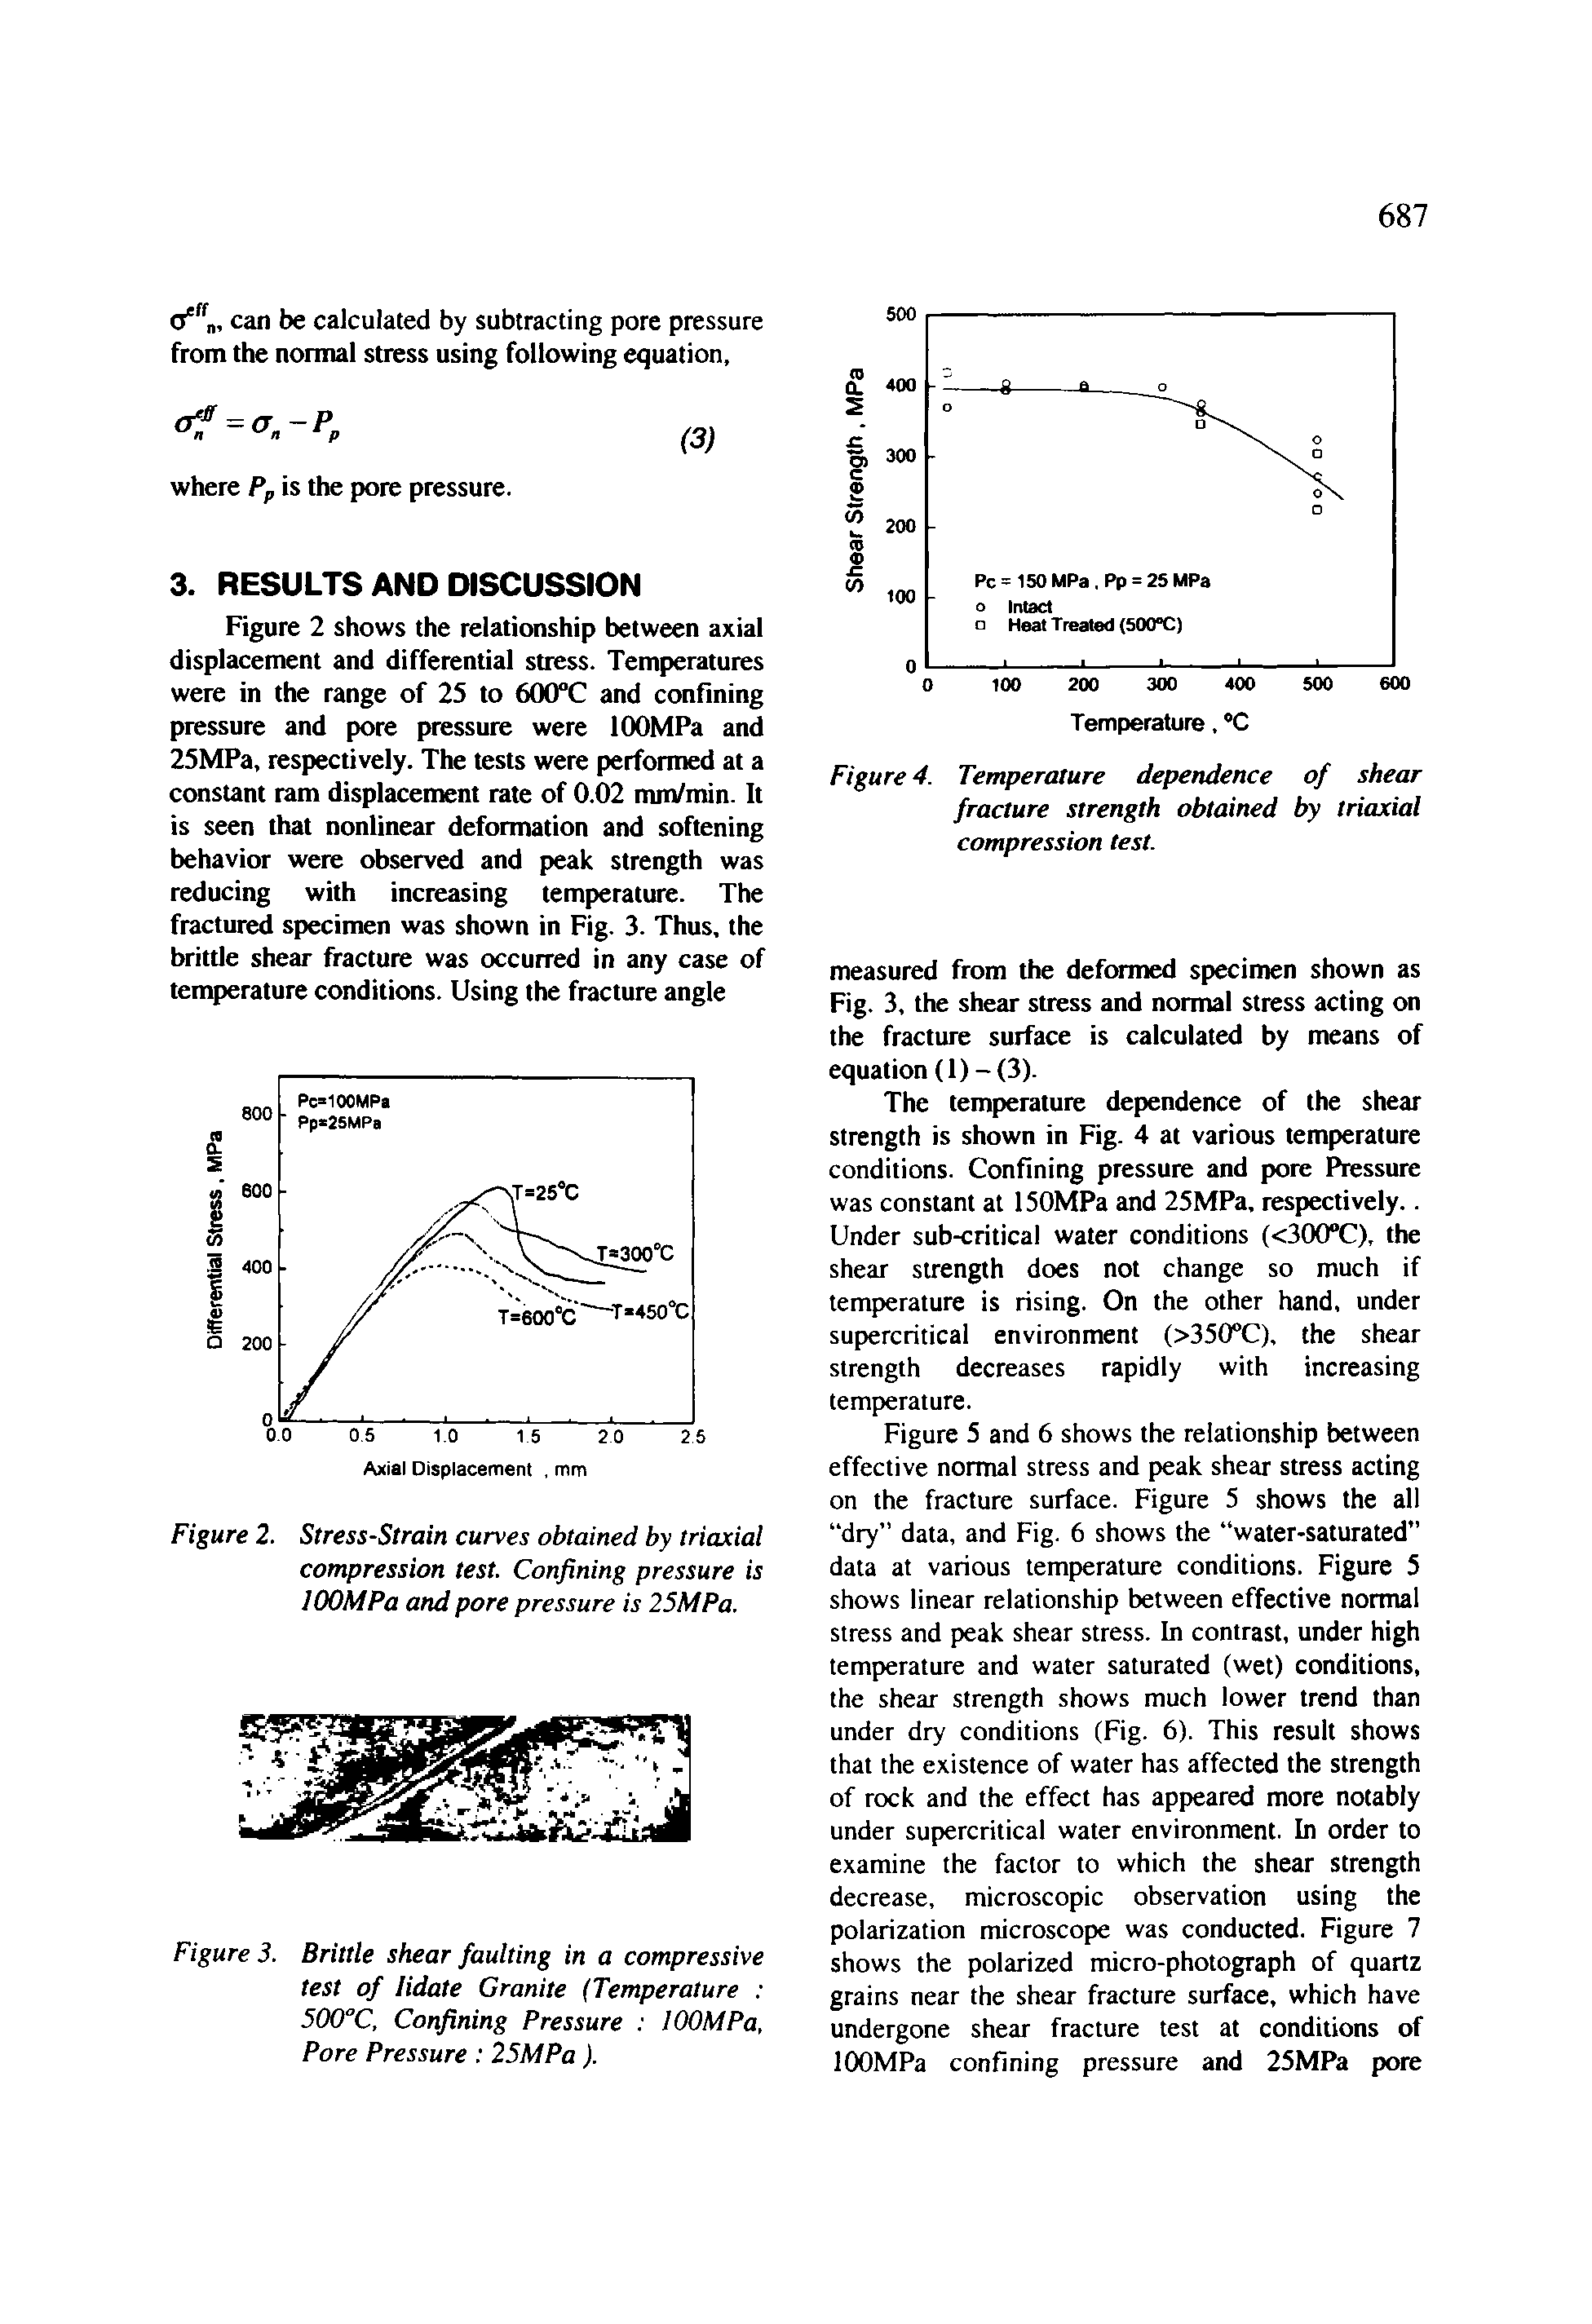 Figure 2 shows the relationship between axial displacement and differential stress. Temperatures were in the range of 25 to 600°C and confining pressure and pore pressure were lOOMPa and 25MPa, respectively. The tests were performed at a constant ram displacement rate of 0.02 mm/min. It is seen that nonlinear deformation and softening behavior were observed and peak strength was reducing with increasing temperature. The fractured specimen was shown in Fig. 3. Thus, the brittle shear fracture was occurred in any case of temperature conditions. Using the fracture angle...